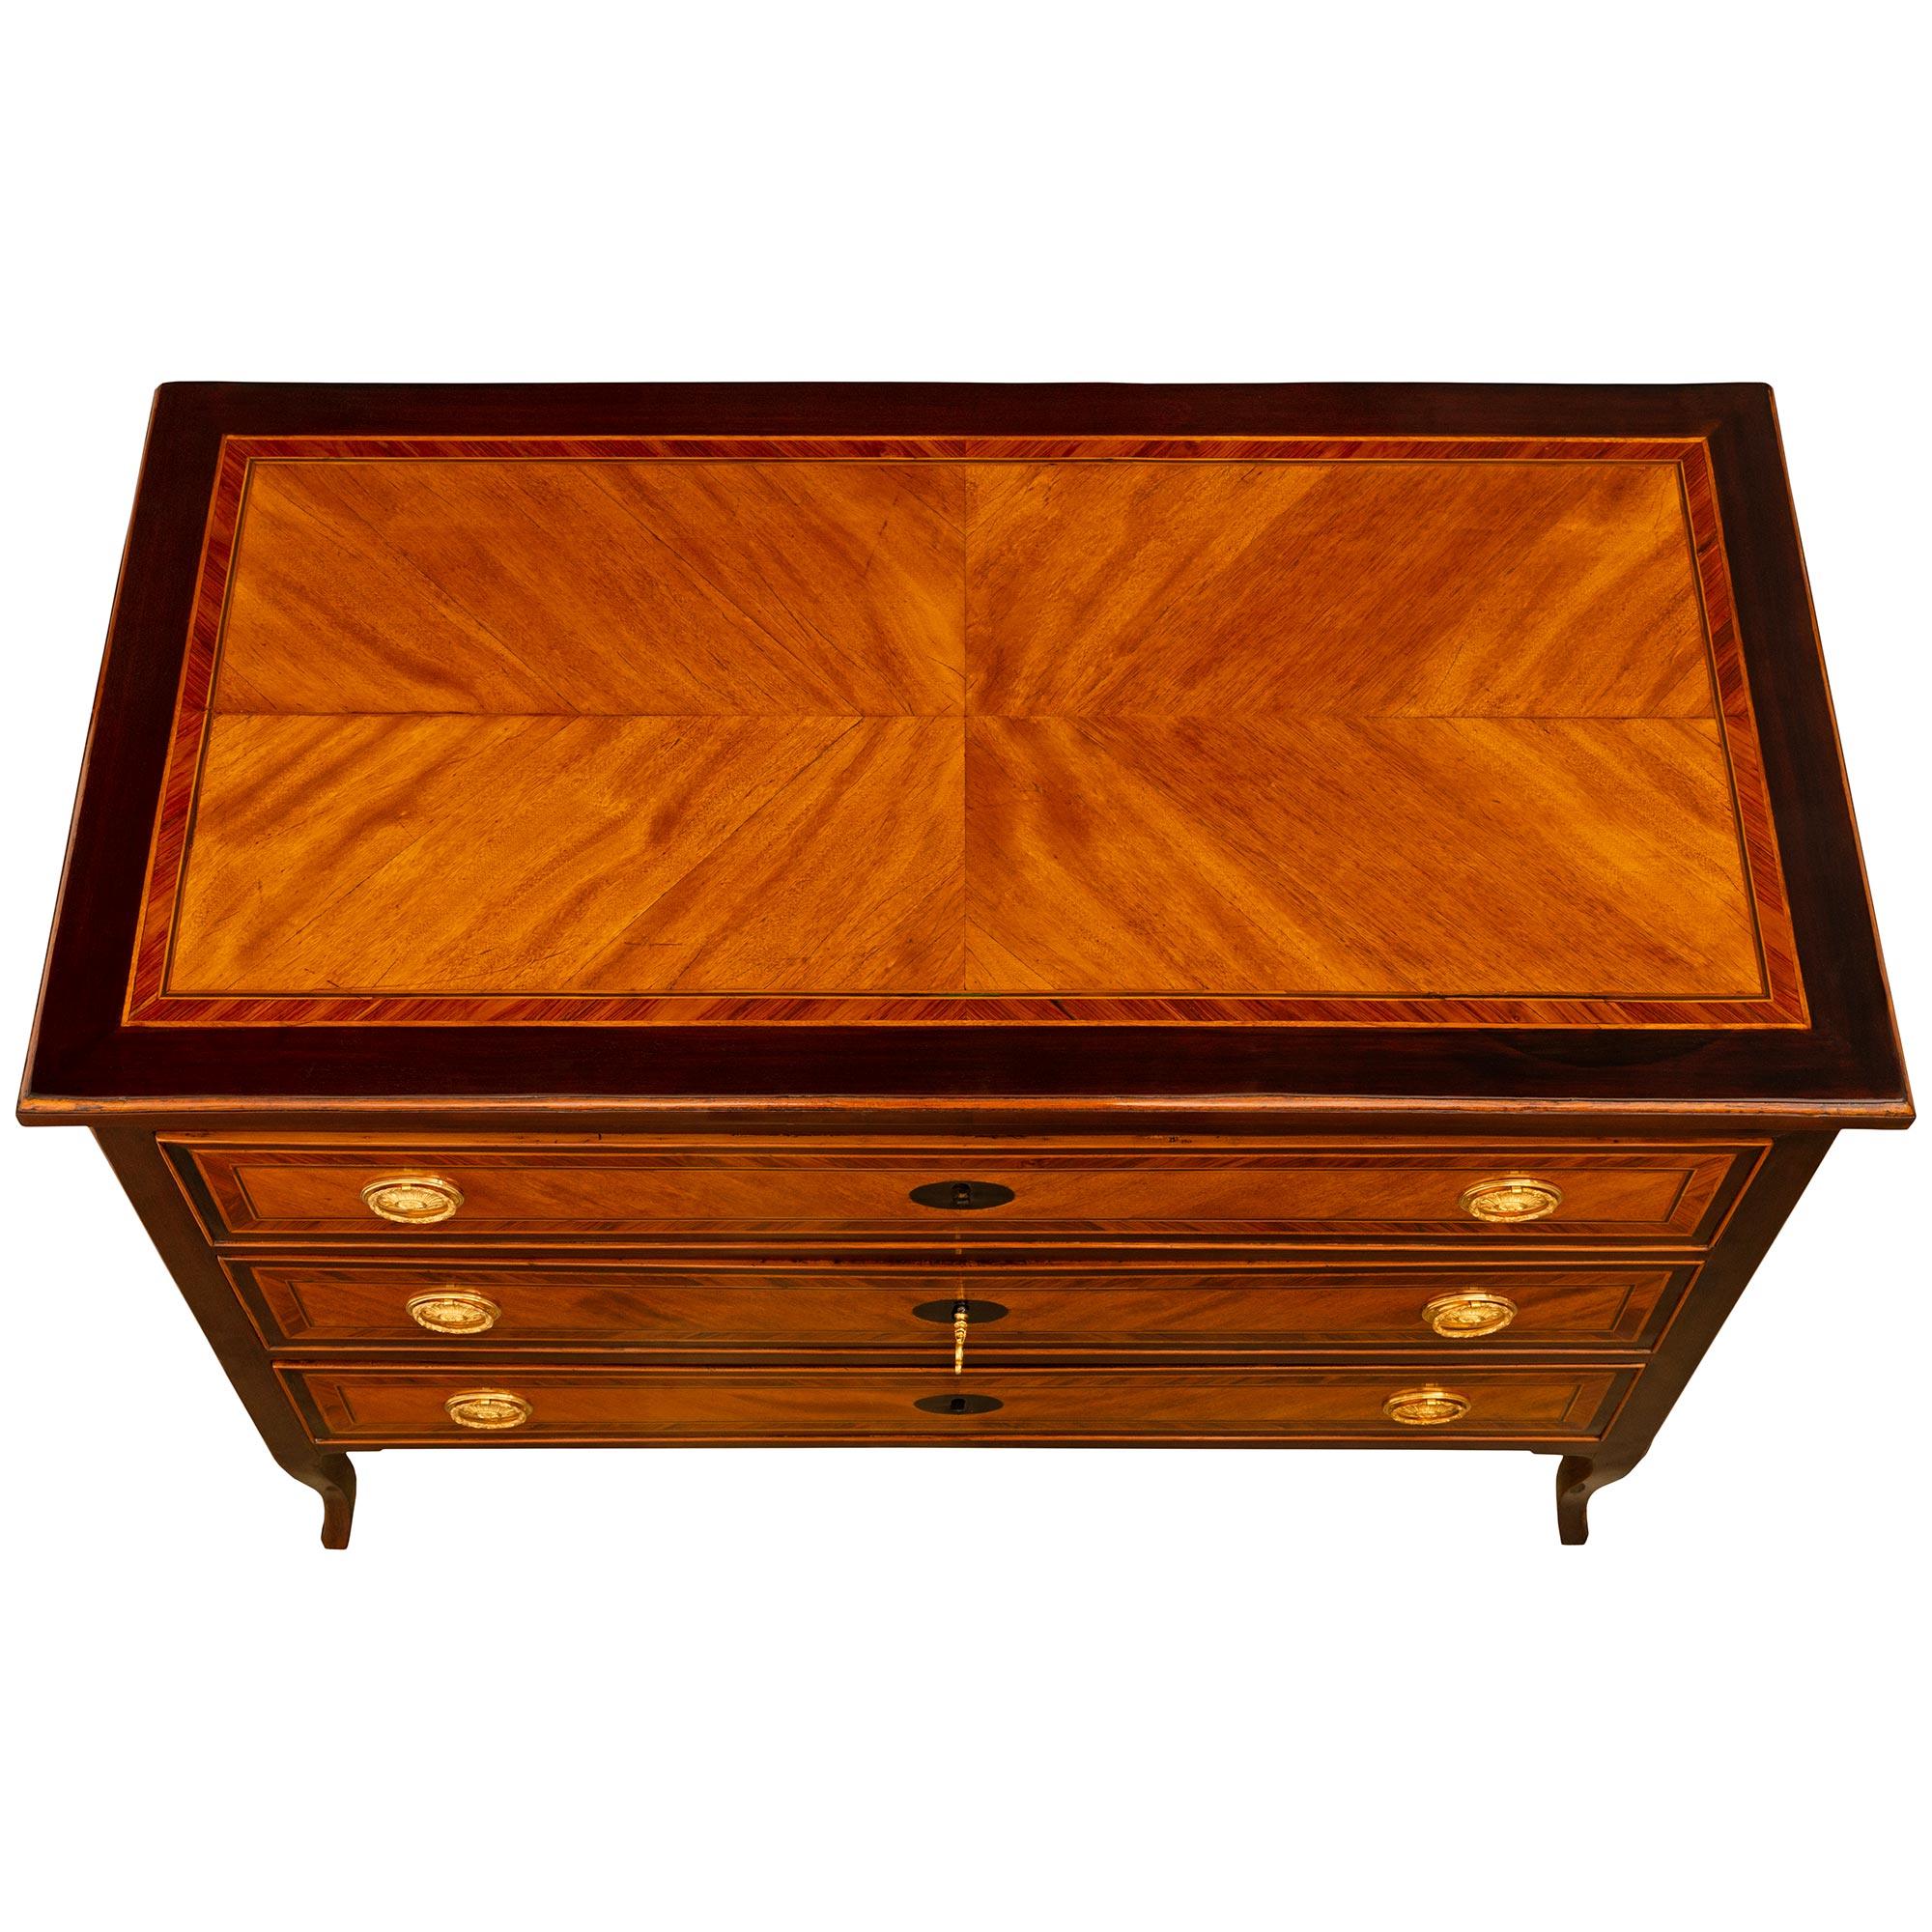 A handsome Italian 18th century Transitional period Mahogany, Tulipwood, Cherrywood and Ormolu commode. The three drawer commode is raised by elegant slender tapered cabriole legs below the straight apron and drawers. Each drawer has an central oval